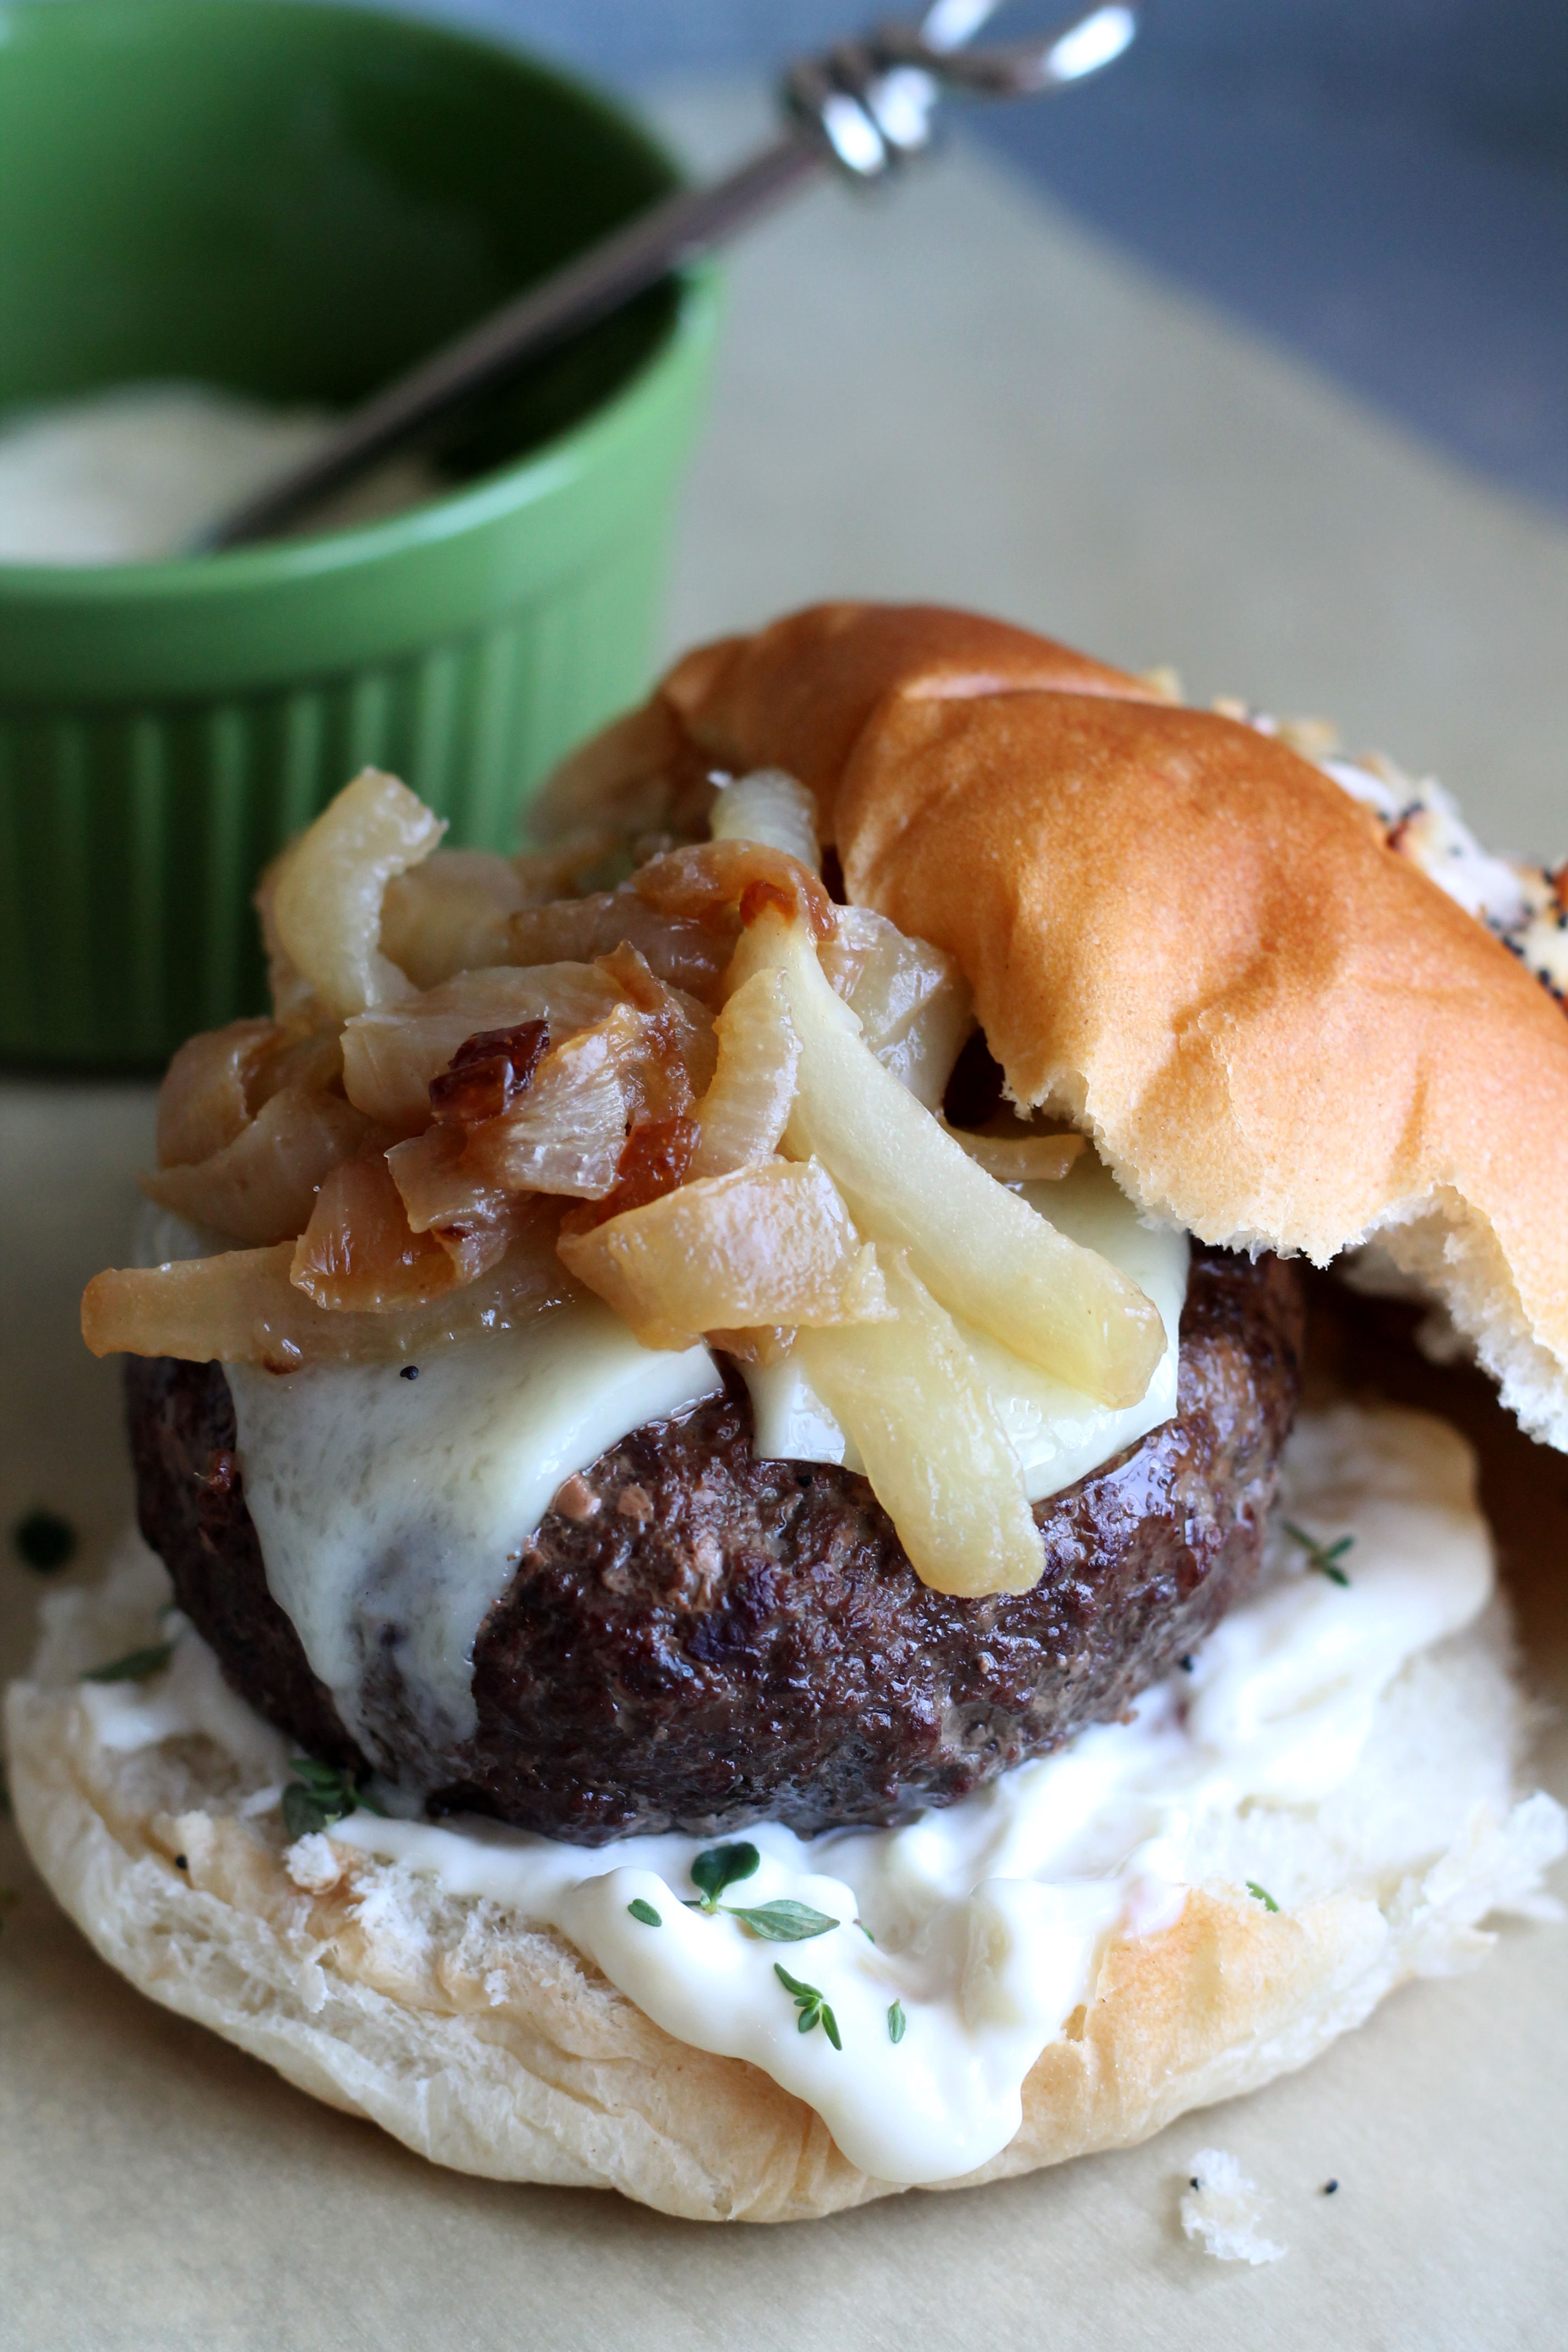 The Ultimate Showstopper a grill lover's new favorite is this French Onion Burger